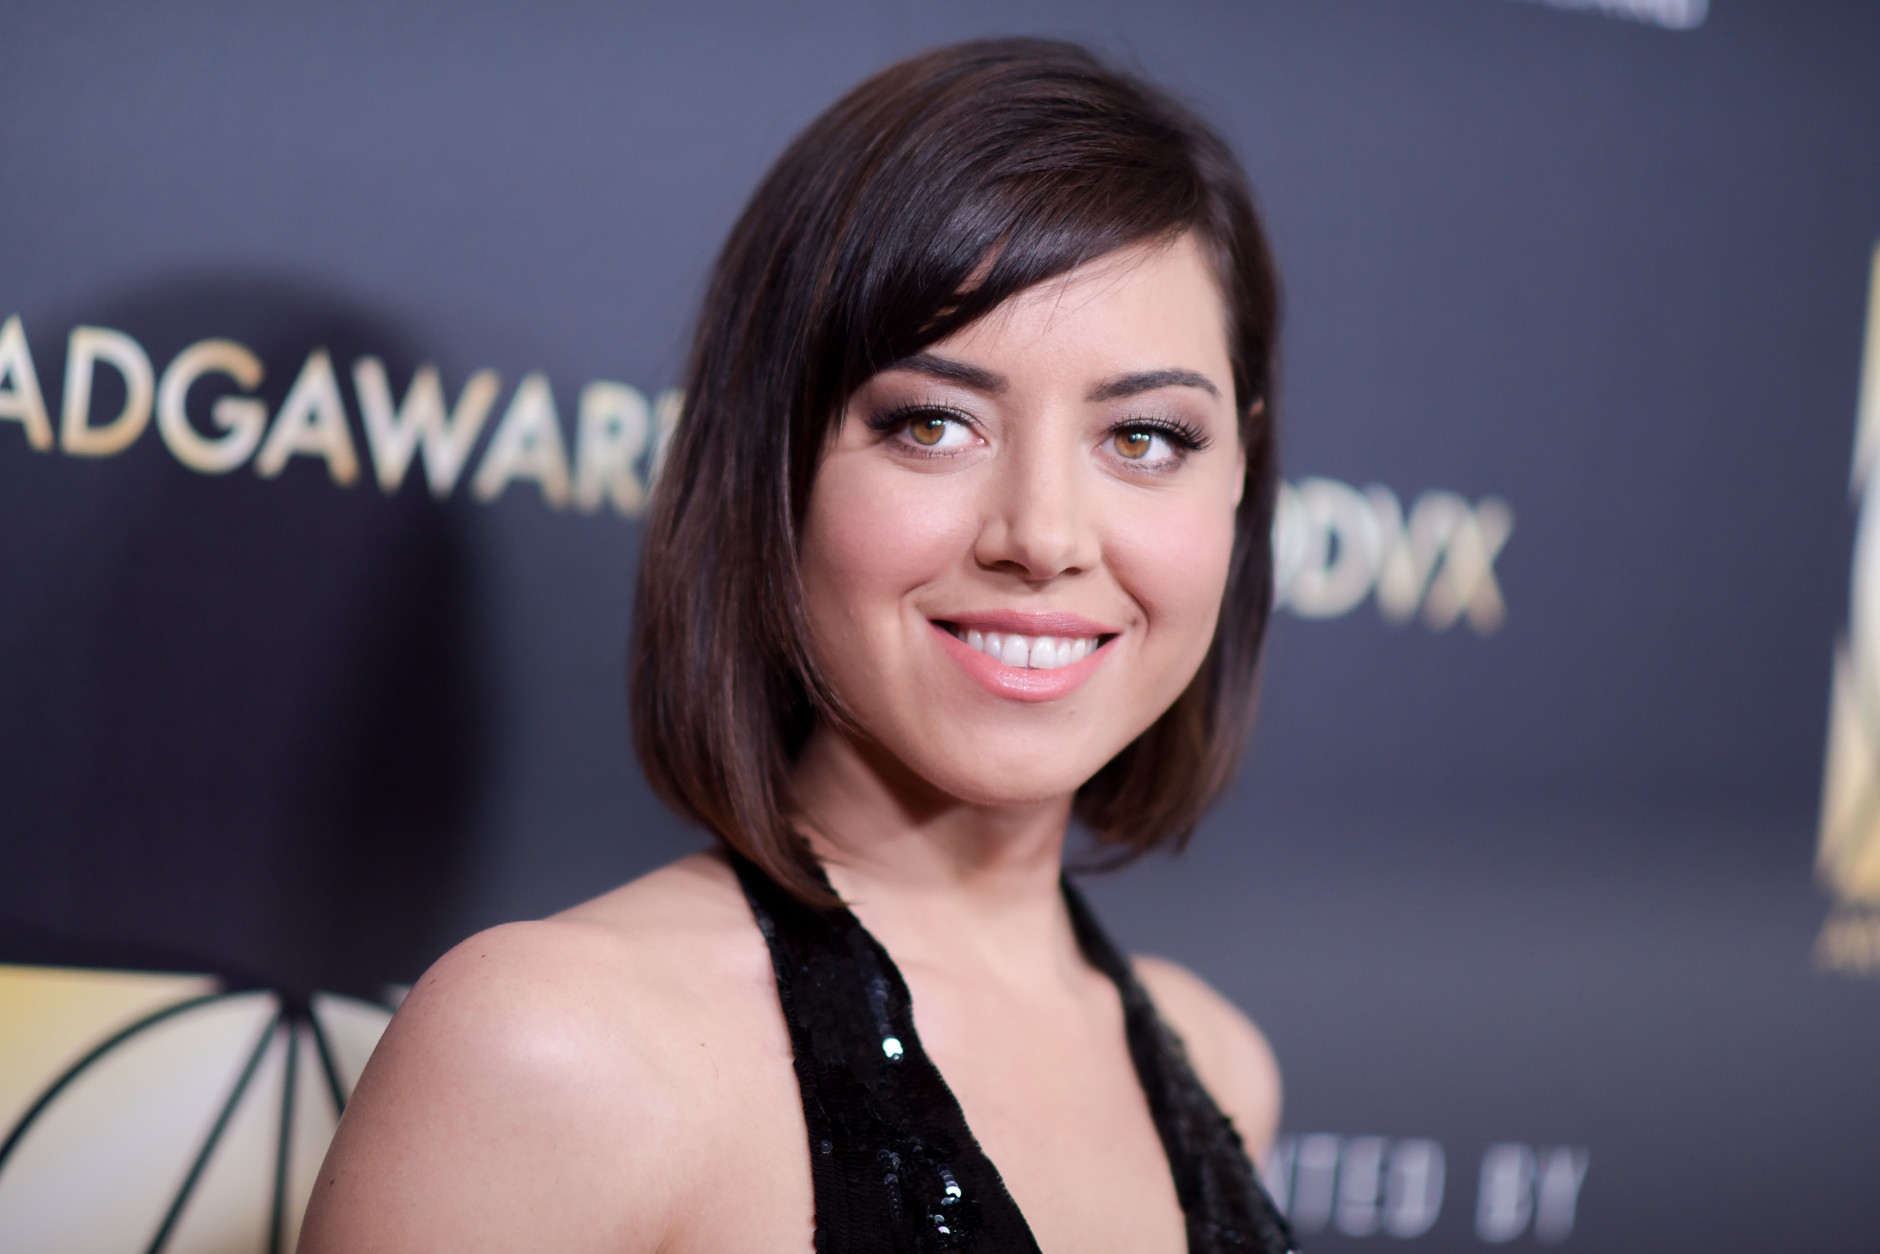 Actress Aubrey Plaza attends the 20th Annual Art Directors Guild Excellence In Production Design Awards held at the Beverly Hilton Hotel on Sunday, Jan. 31, 2016, in Beverly Hills, Calif. (Photo by Richard Shotwell/Invision/AP)